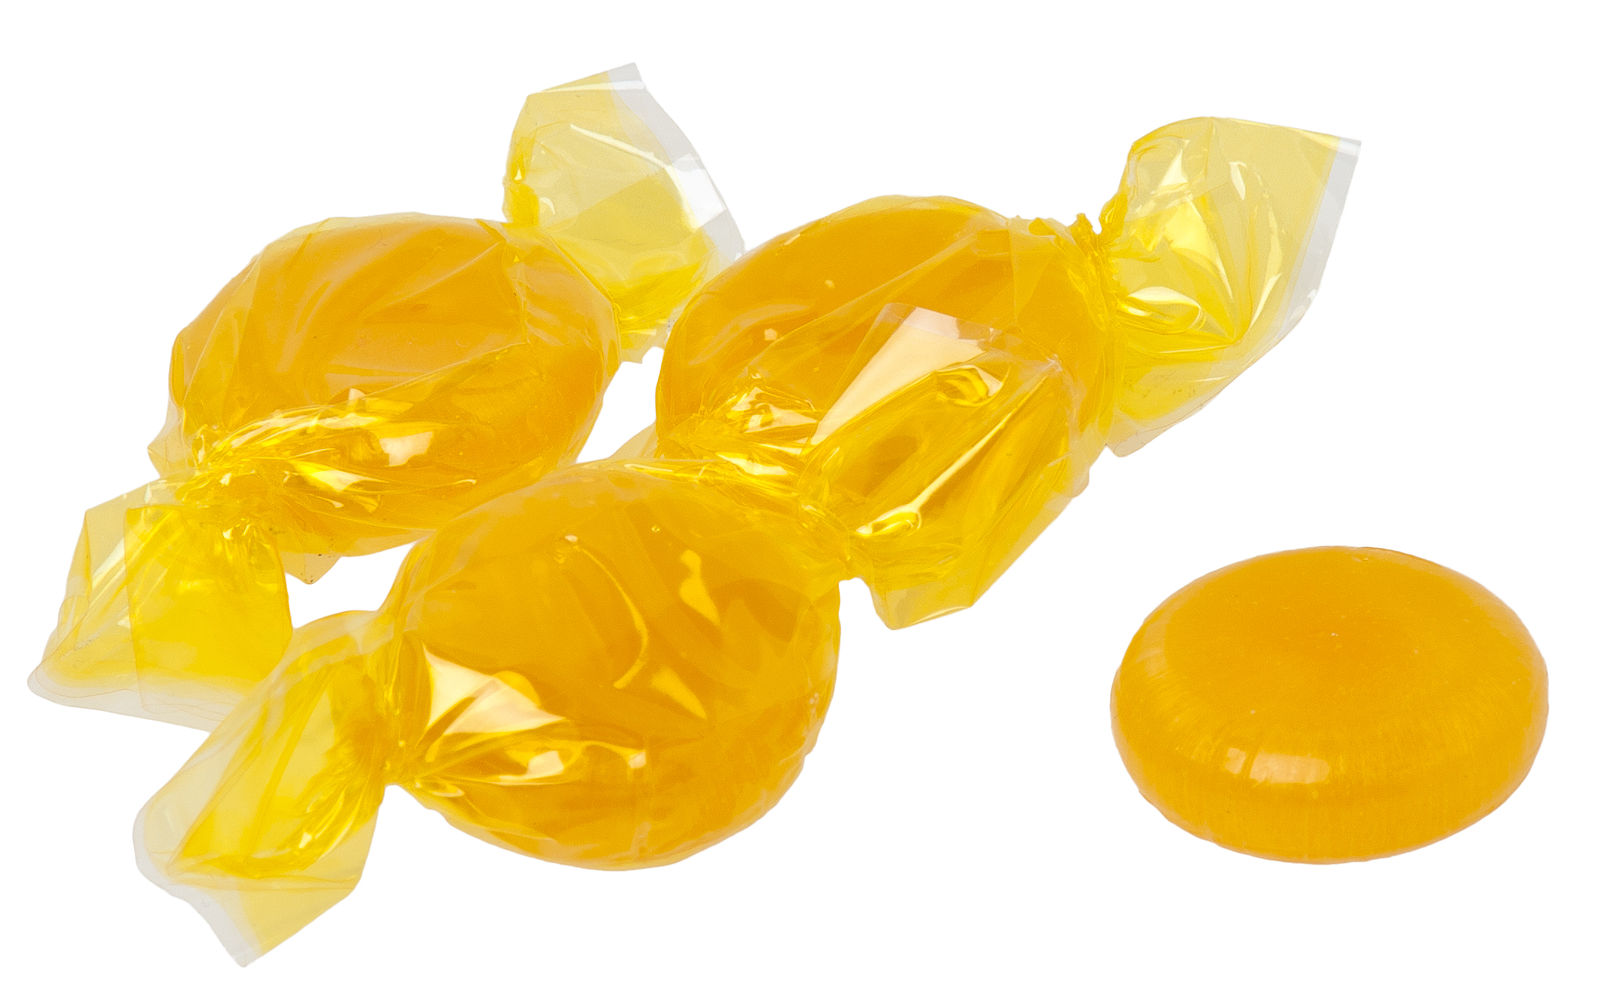 A photograph of hard candies in a vivid yellow color on a white surface.